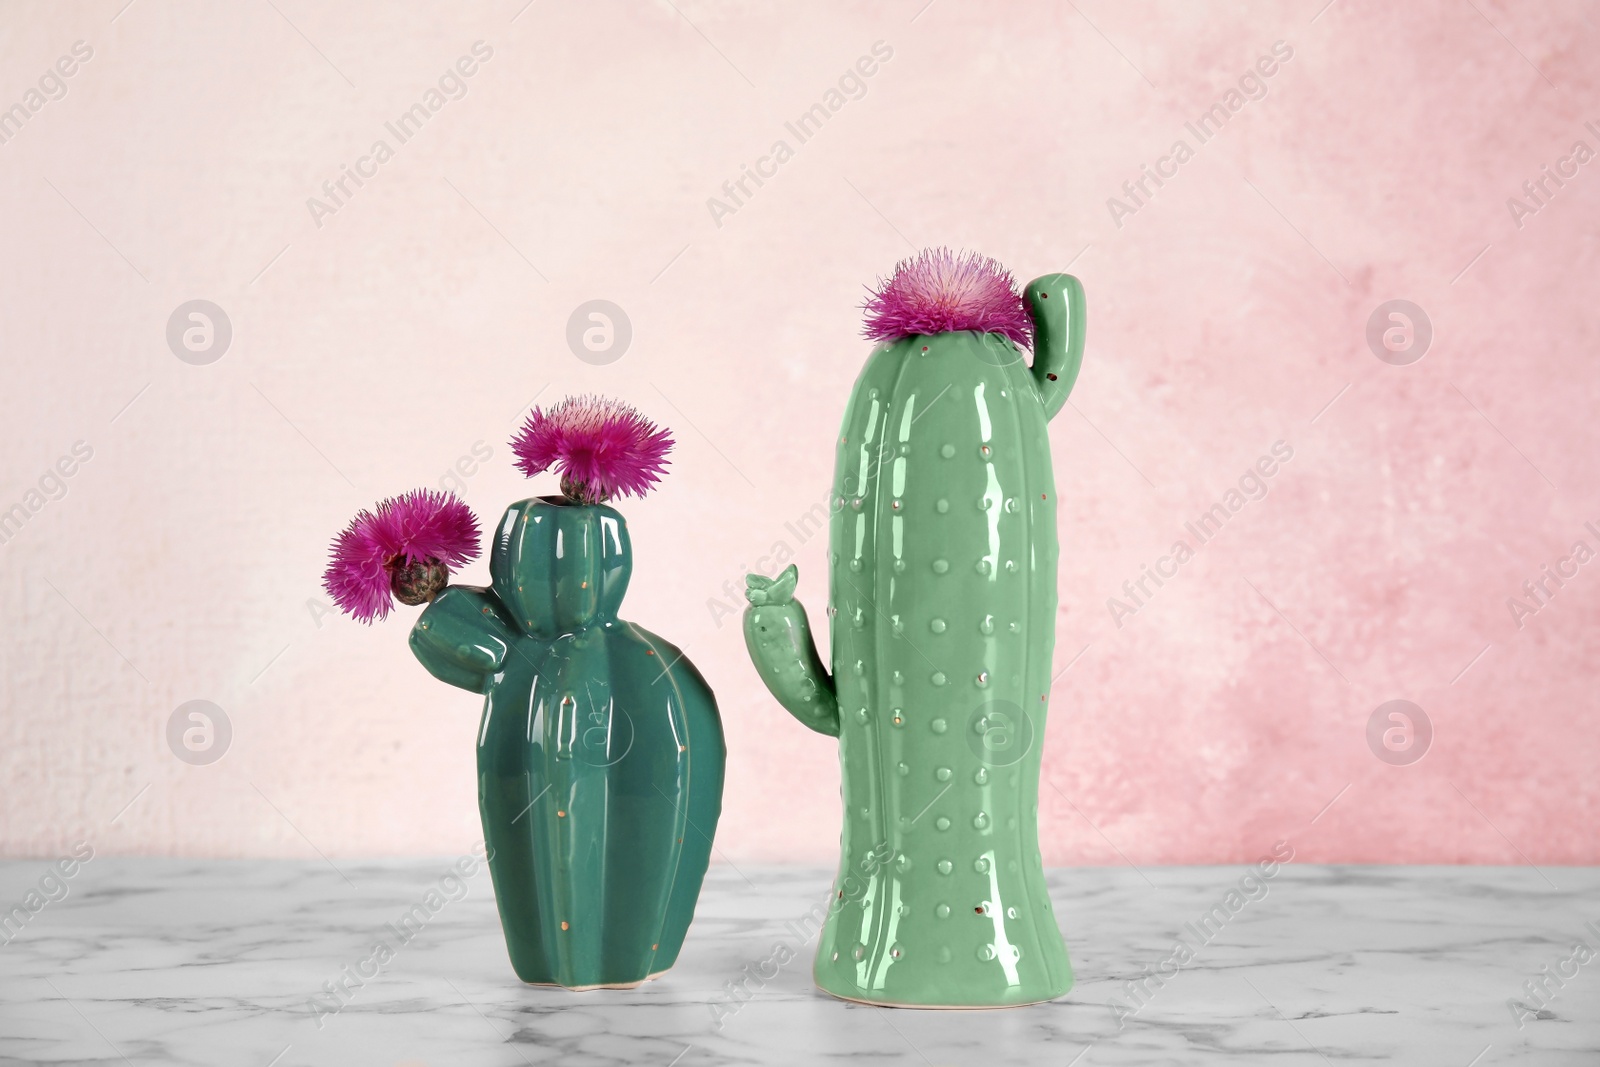 Photo of Trendy cactus shaped ceramic vases with flowers on table